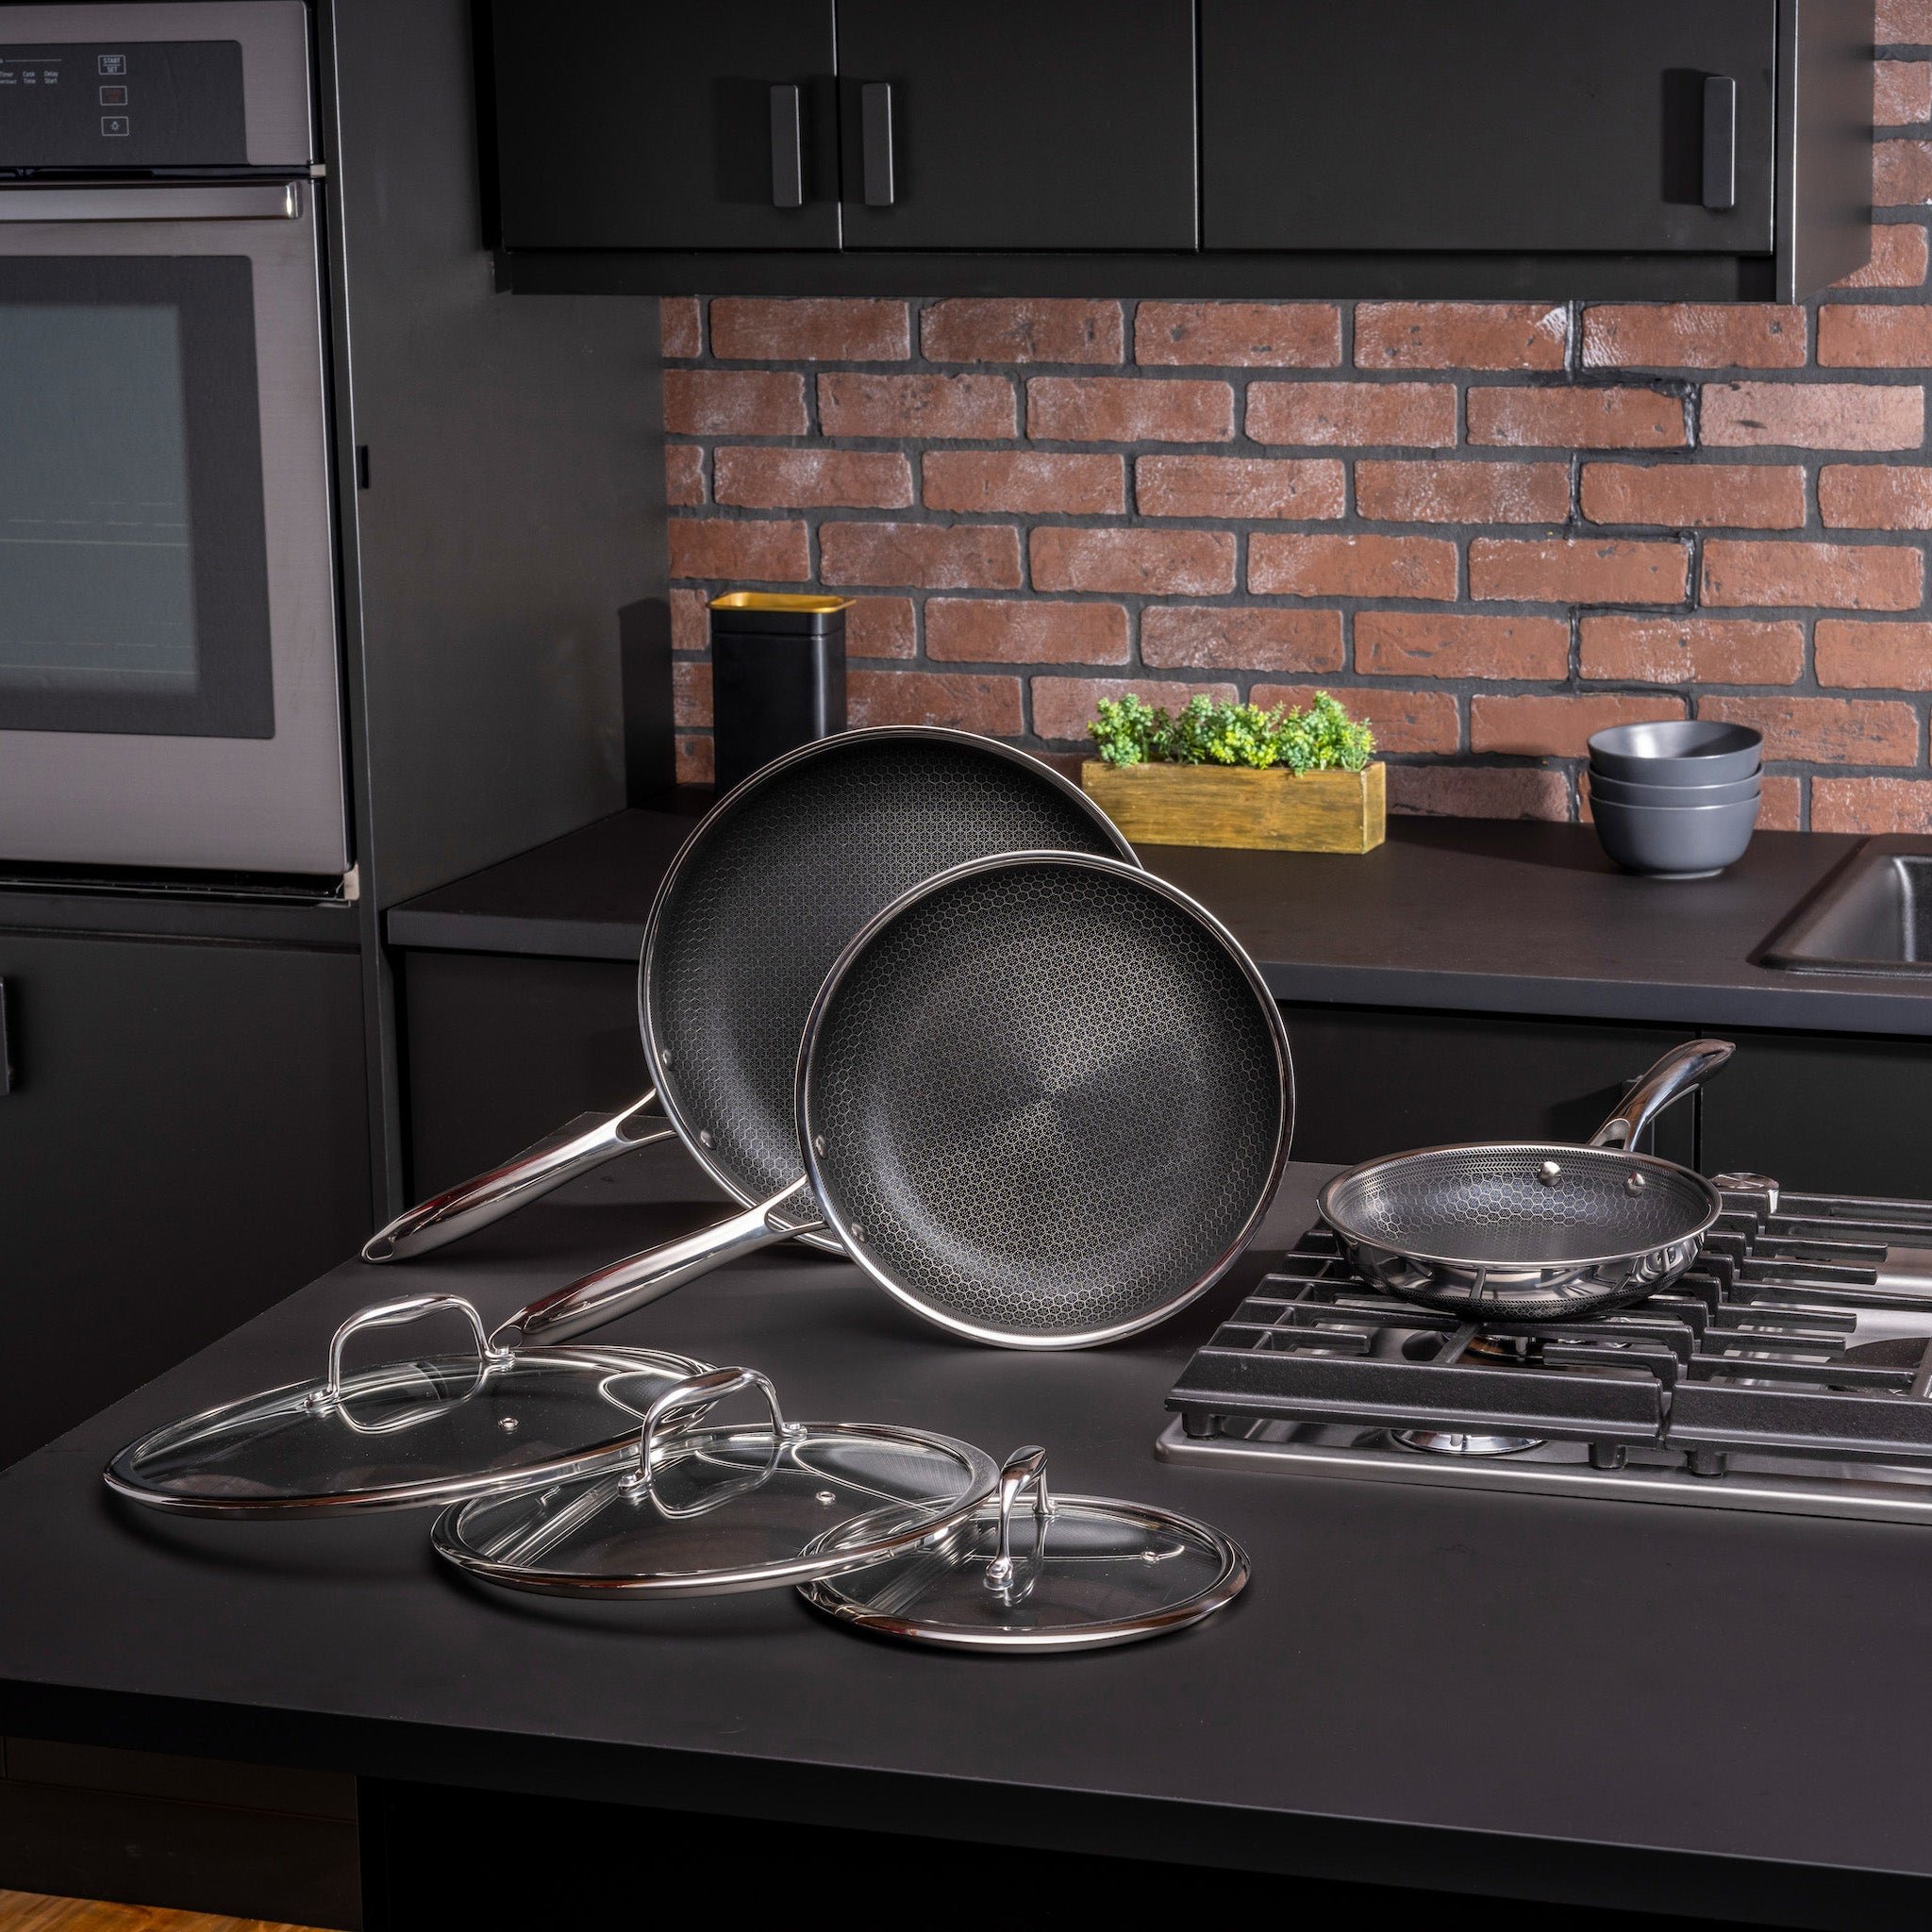 Gordon Ramsay Hexclad Cookware Used on Next Level Chef Top Kitchen 